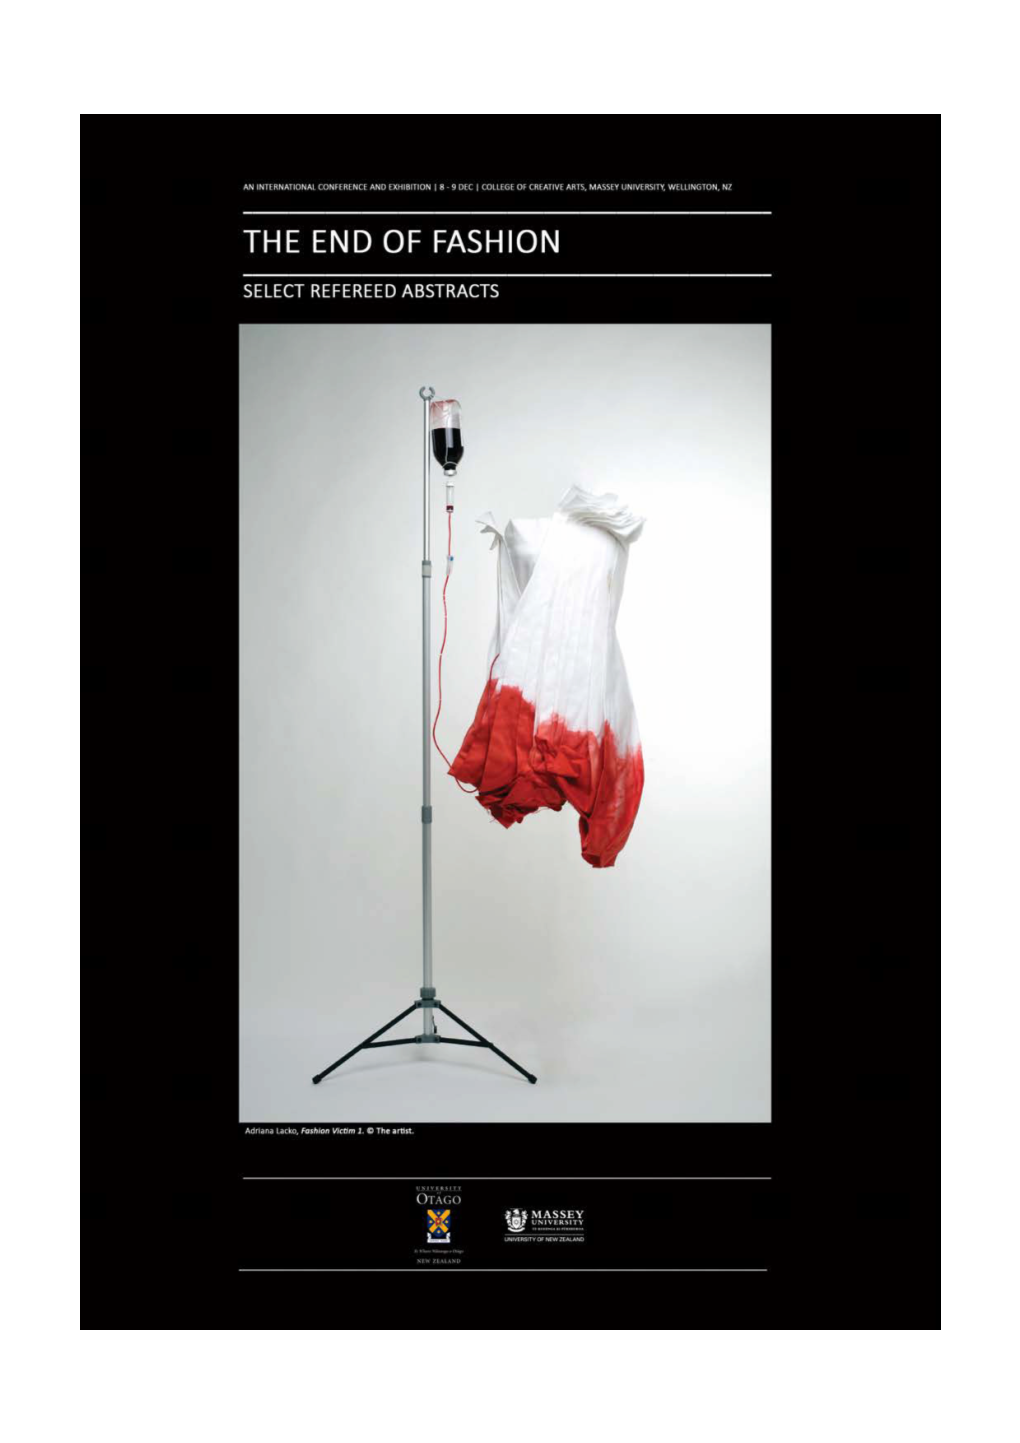 The End of Fashion: an International Conference